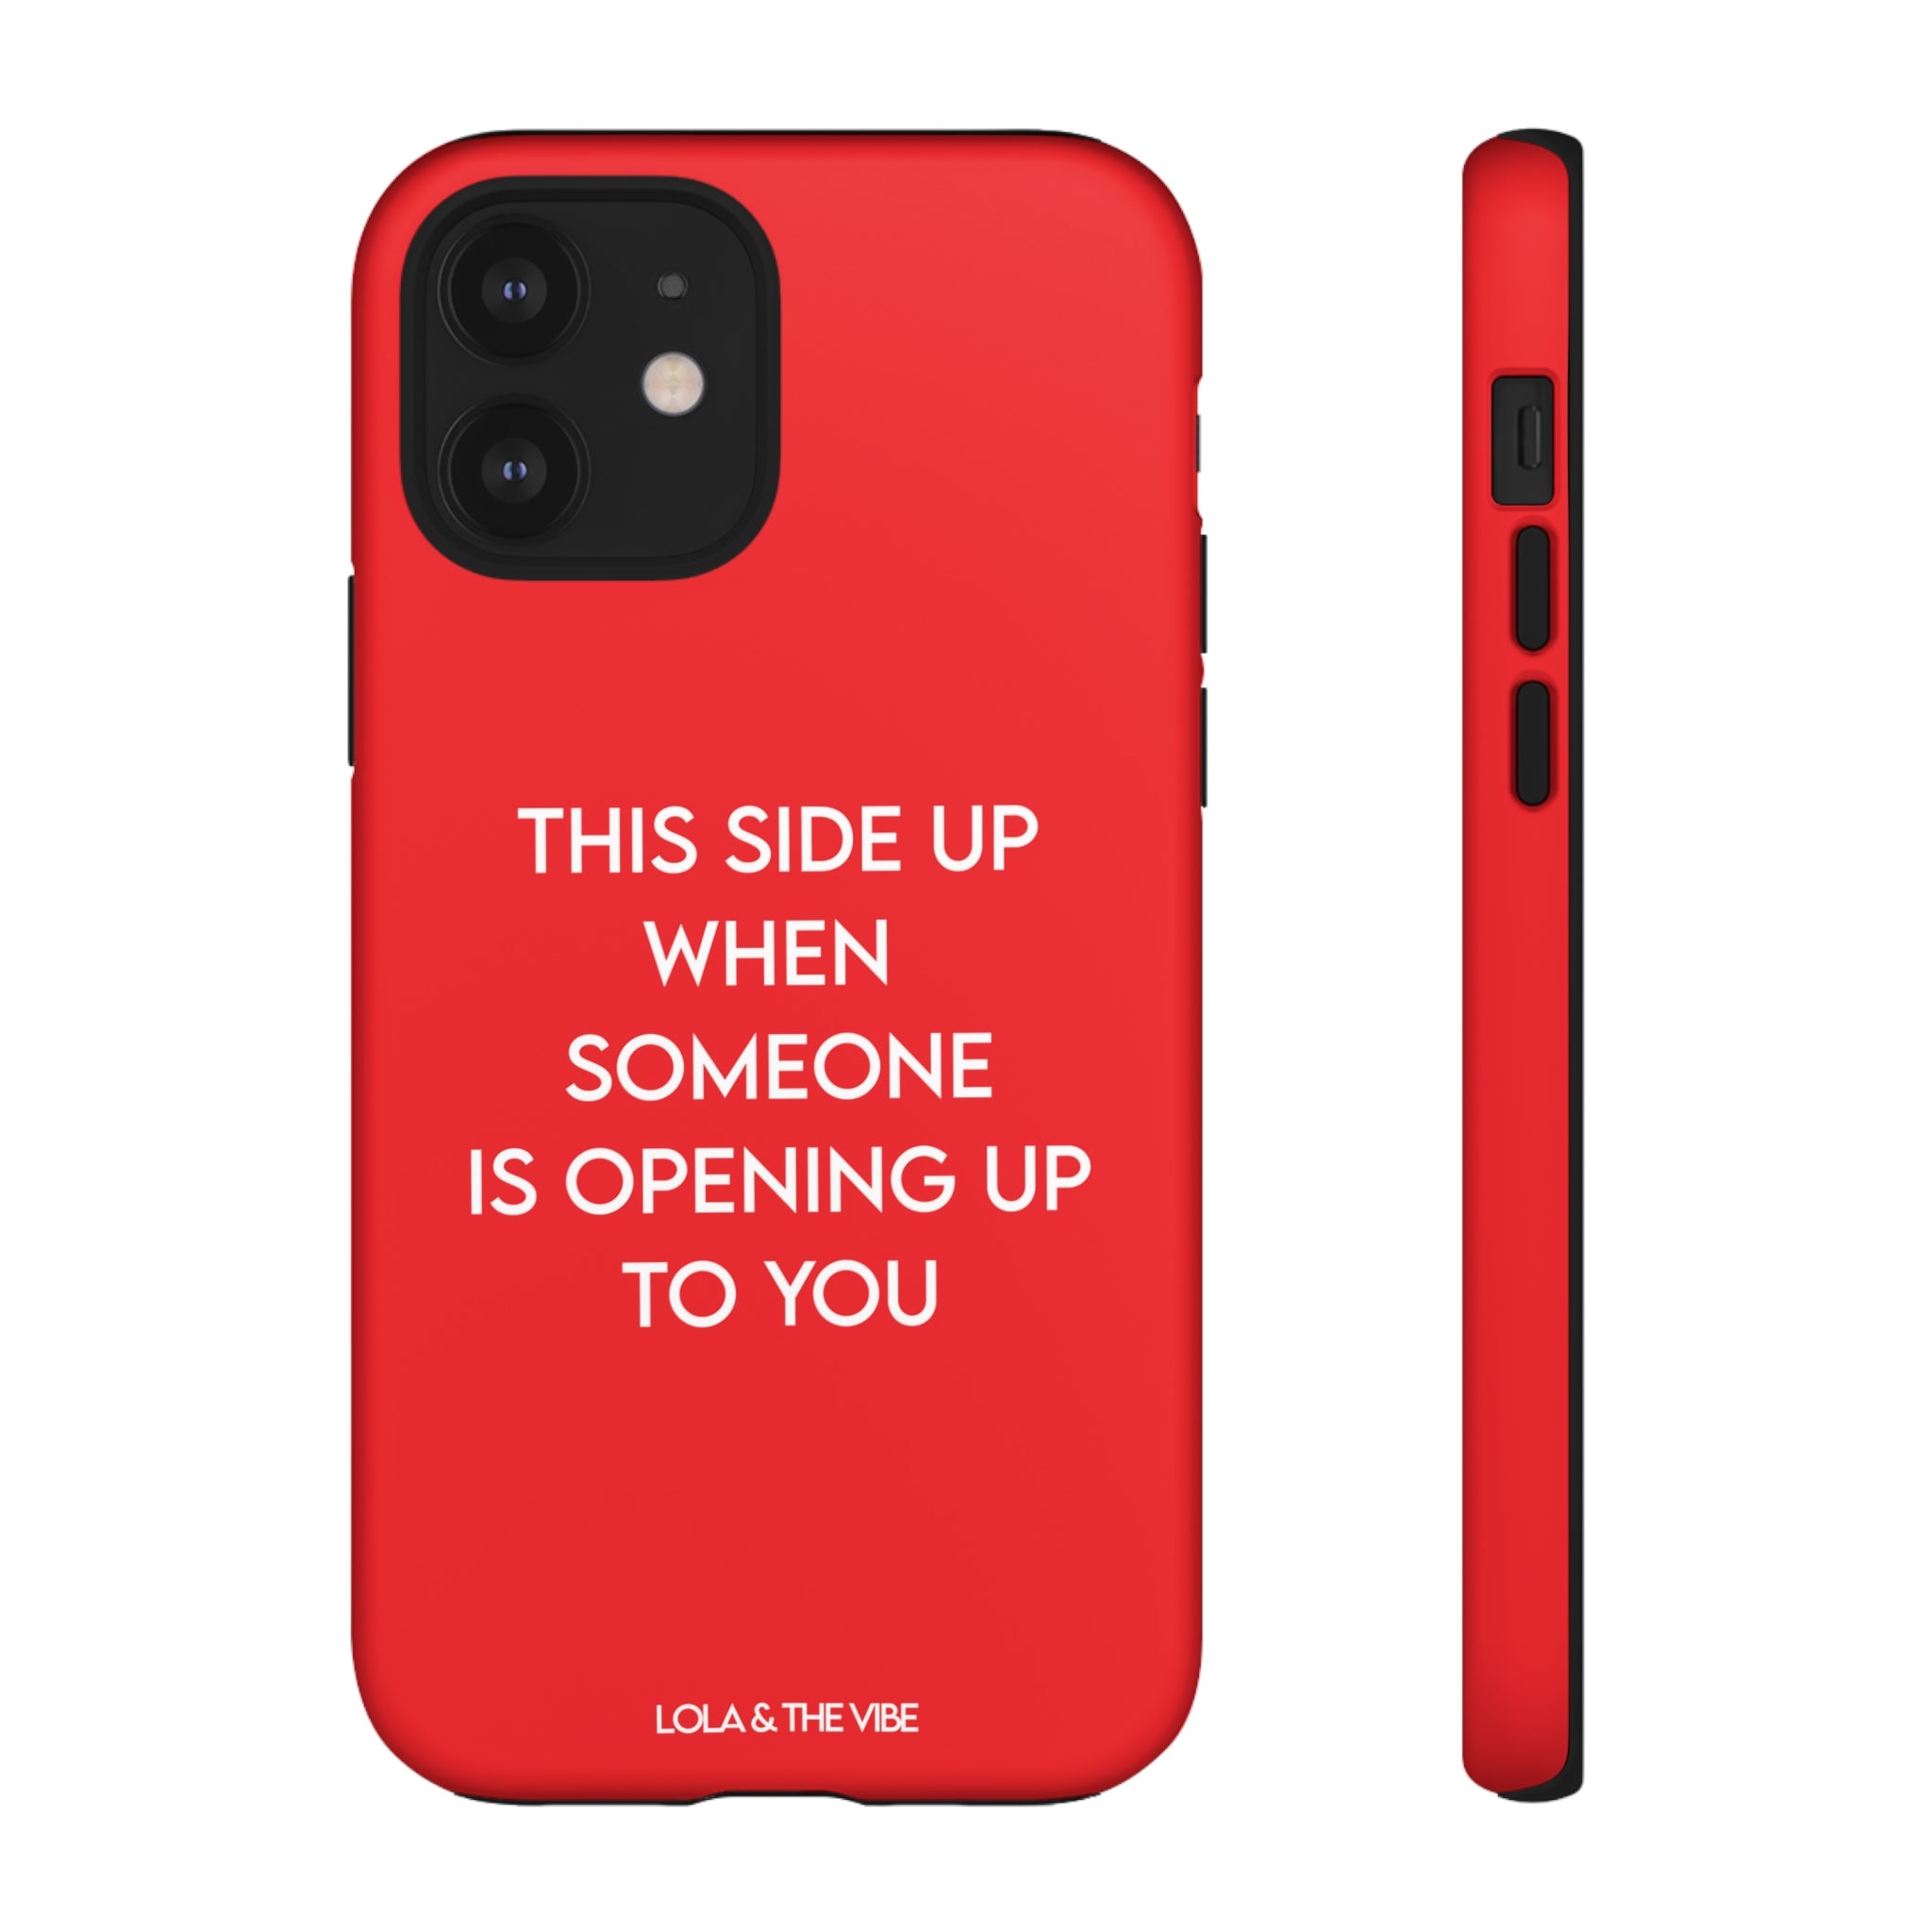 Opening Up iPhone Case